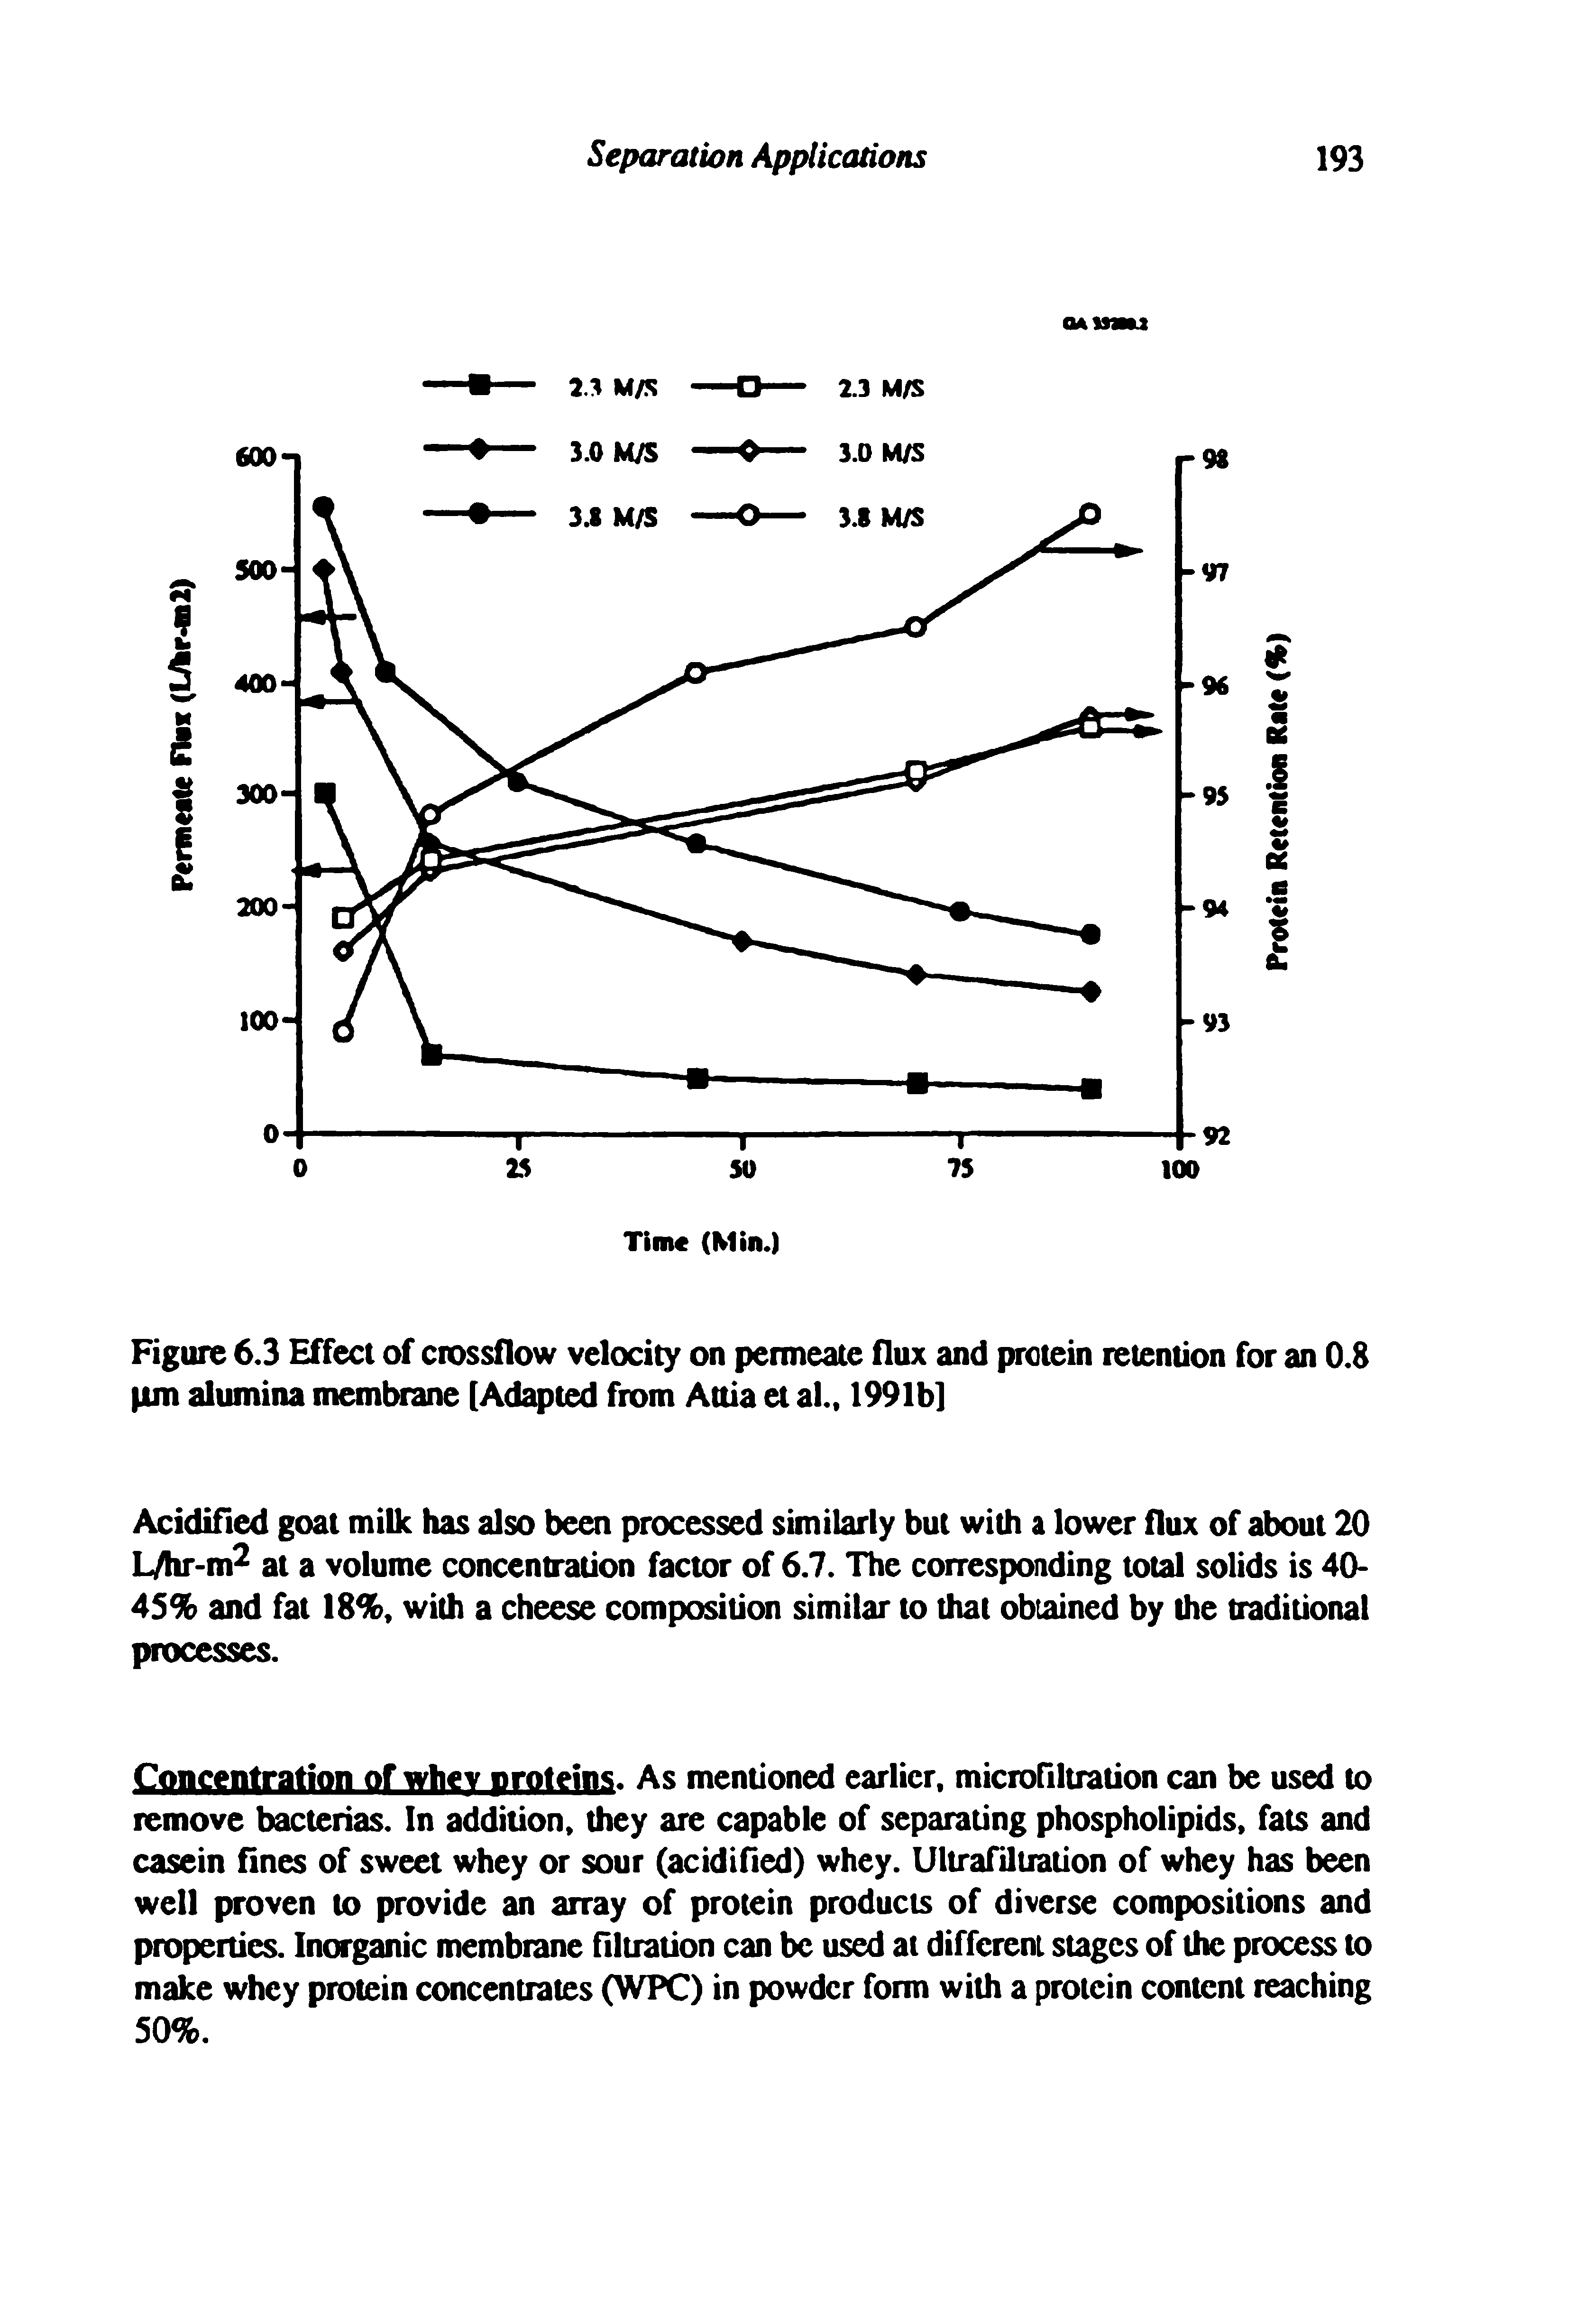 Figure 6.3 Effect of crossflow velocity on permeate flux and protein retention for an 0.8 pm alumina membrane [Adapted from Attia et al., 1991b]...